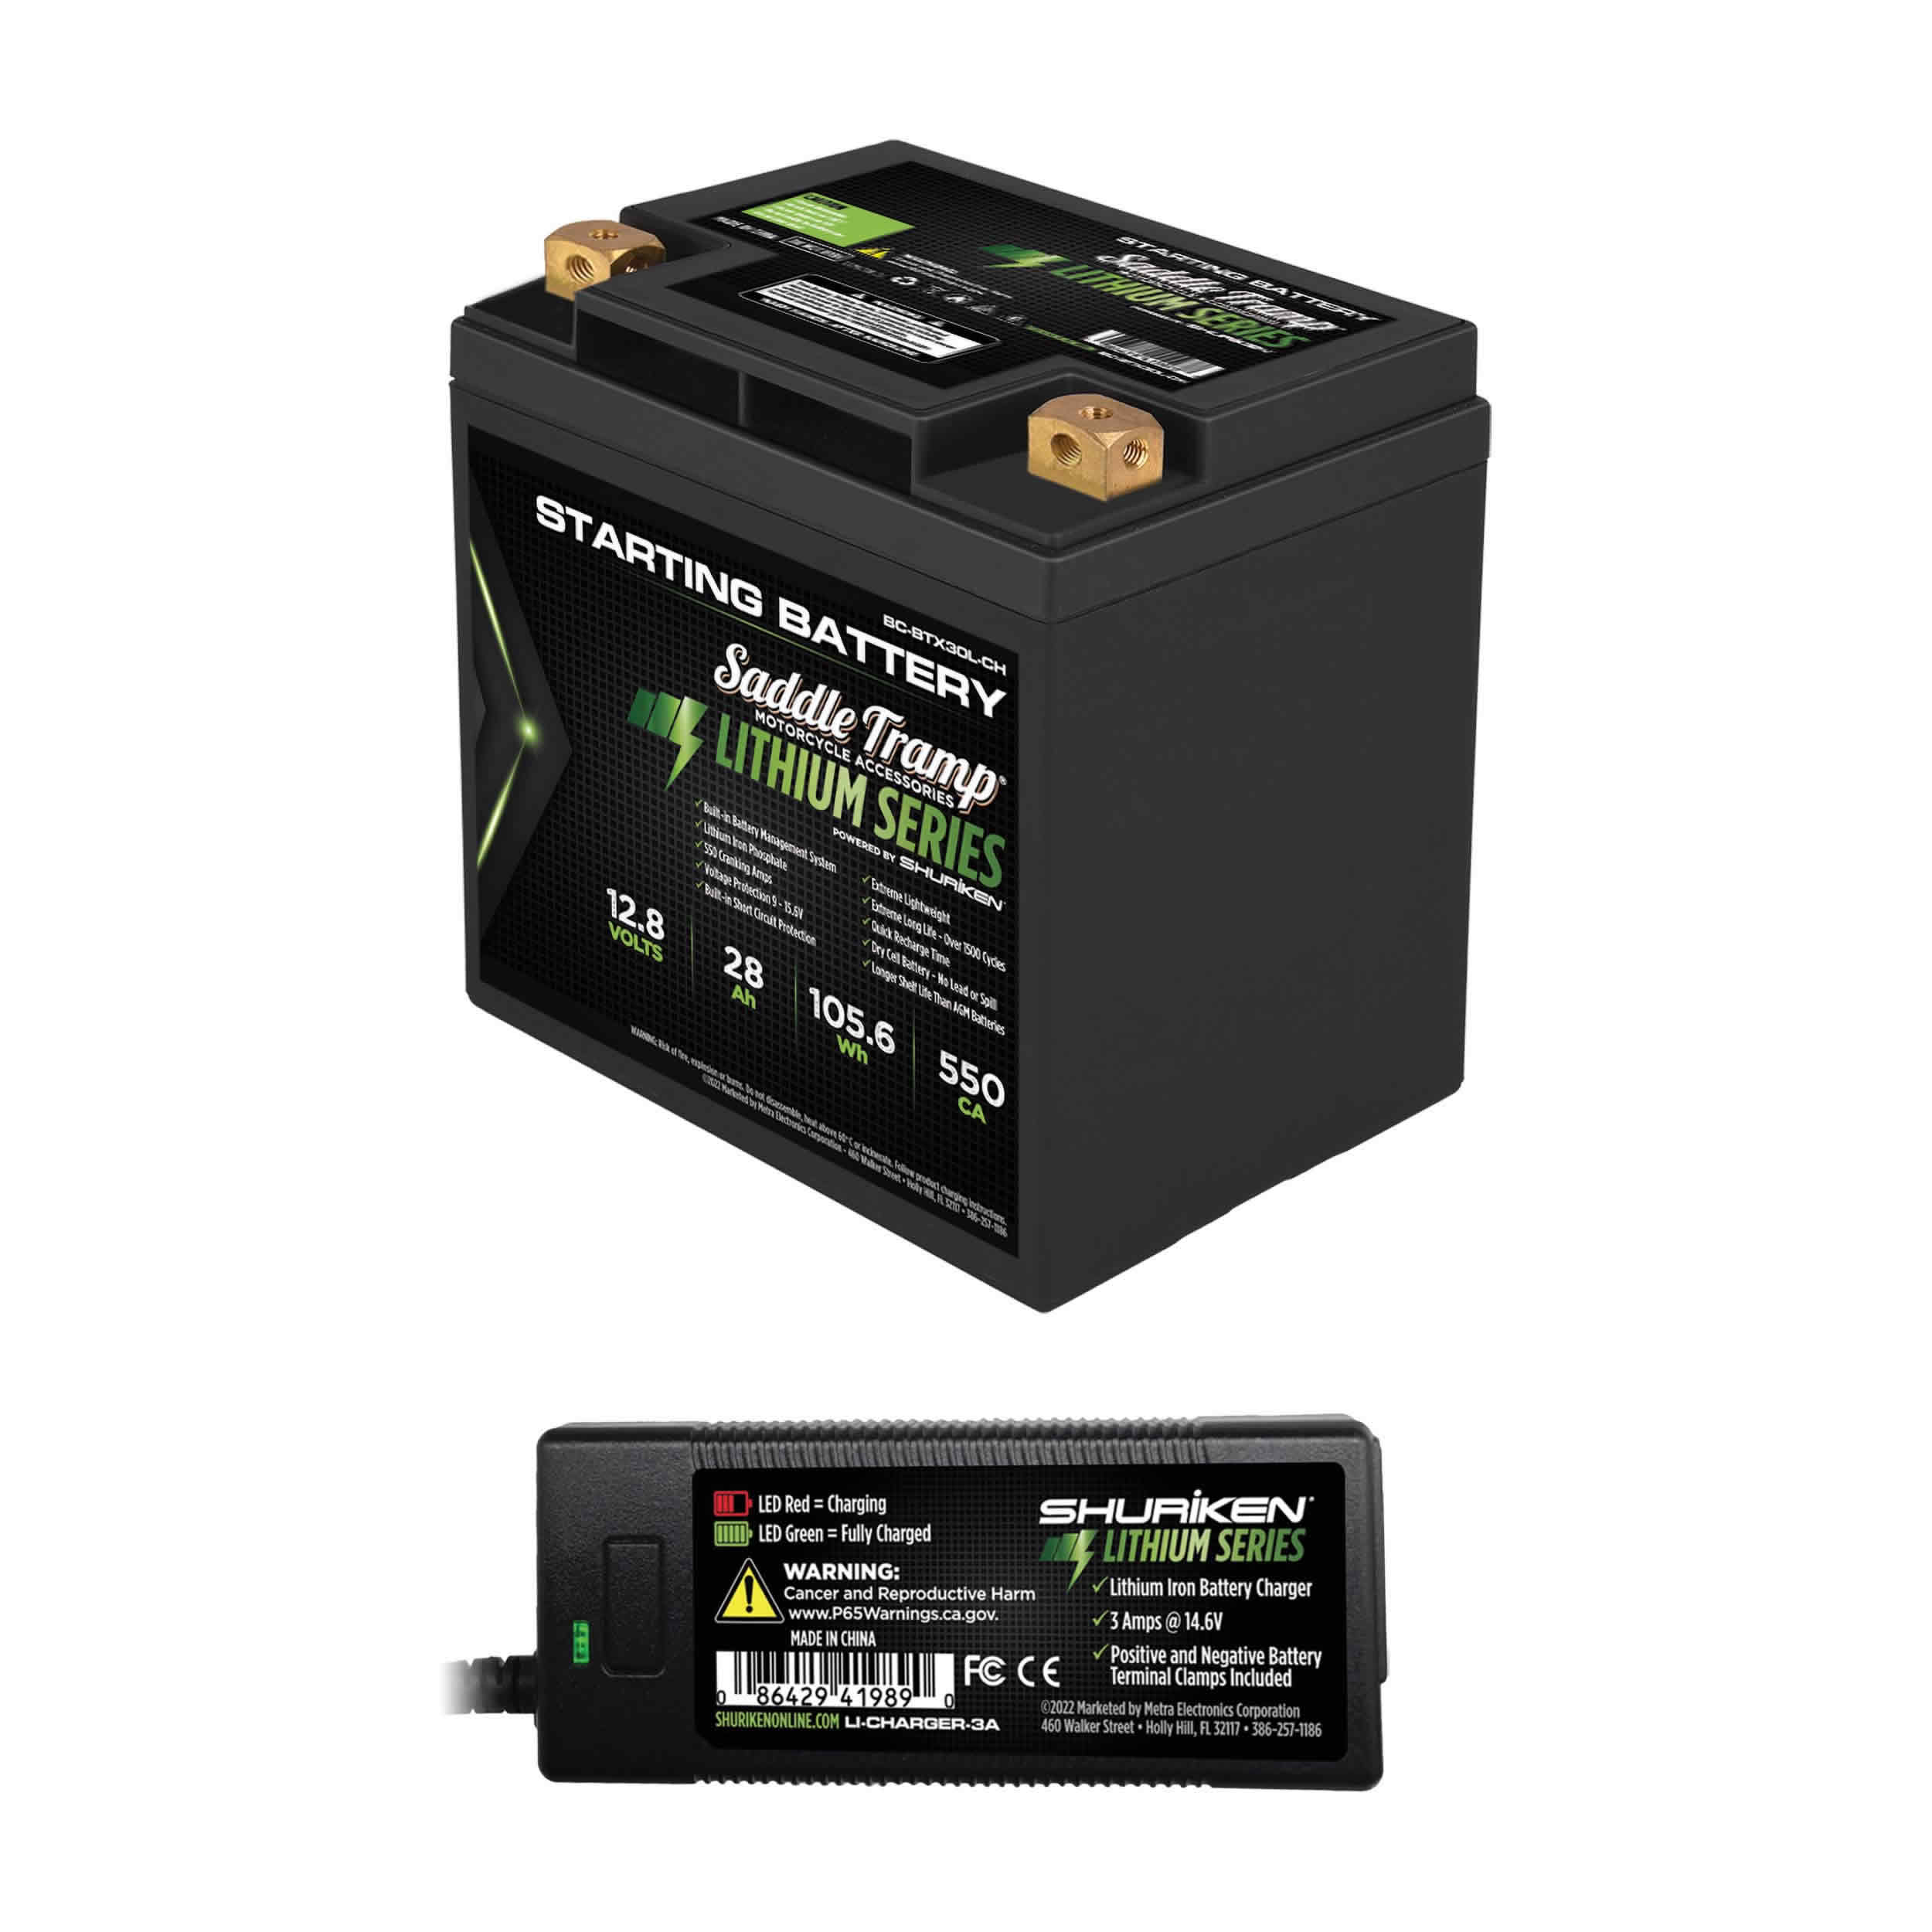 550CA / 10.15AH Lithium-Ion Starting Battery with Charger